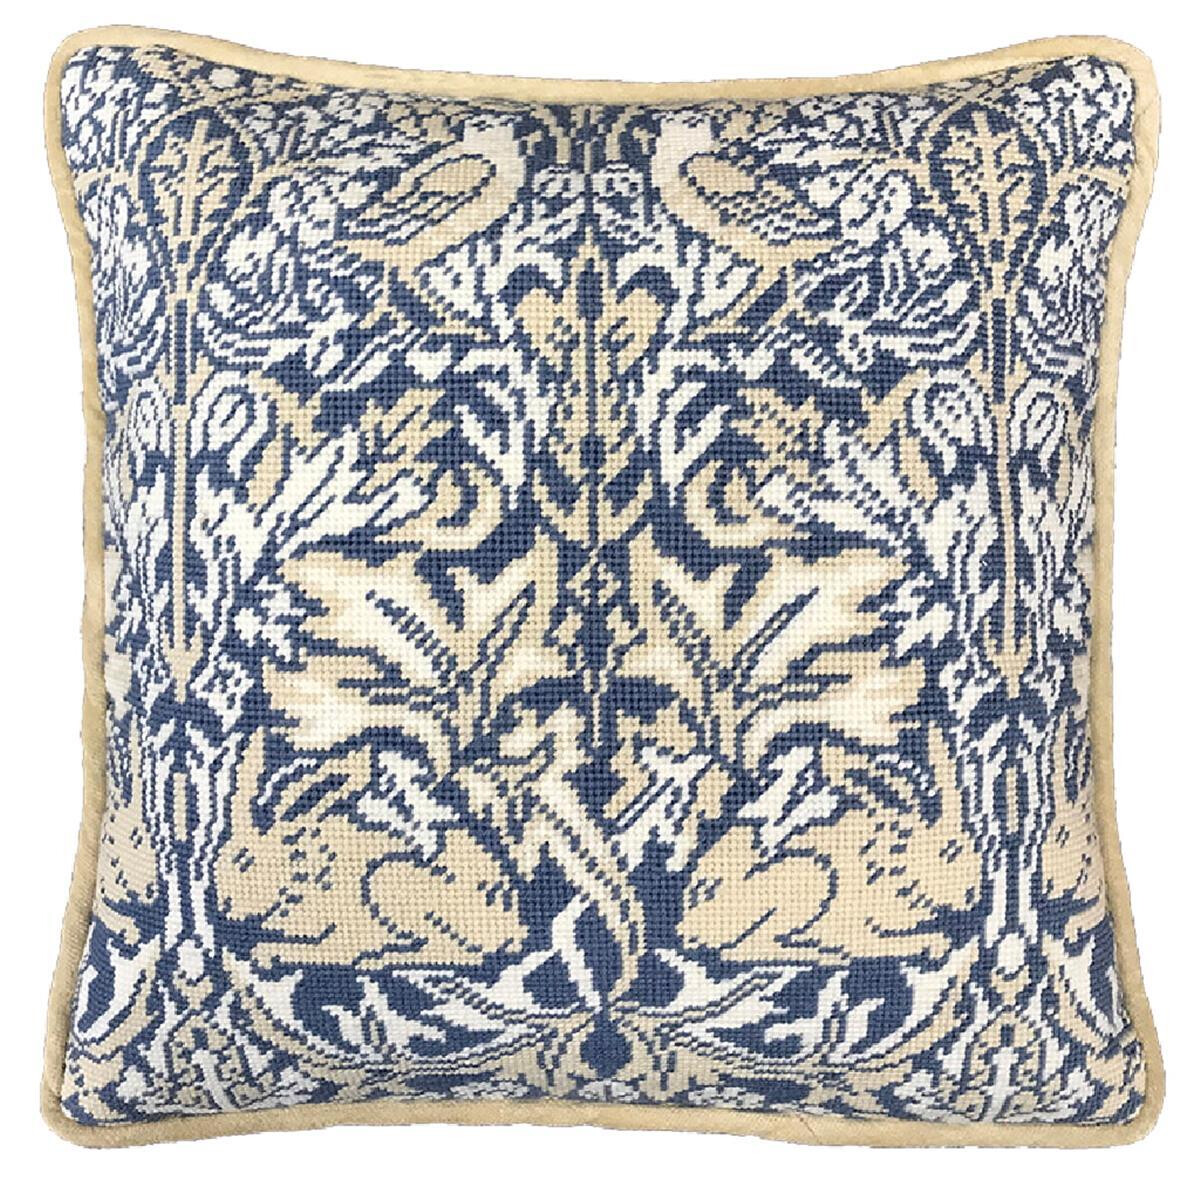 A square cushion with an intricate tapestry-like...